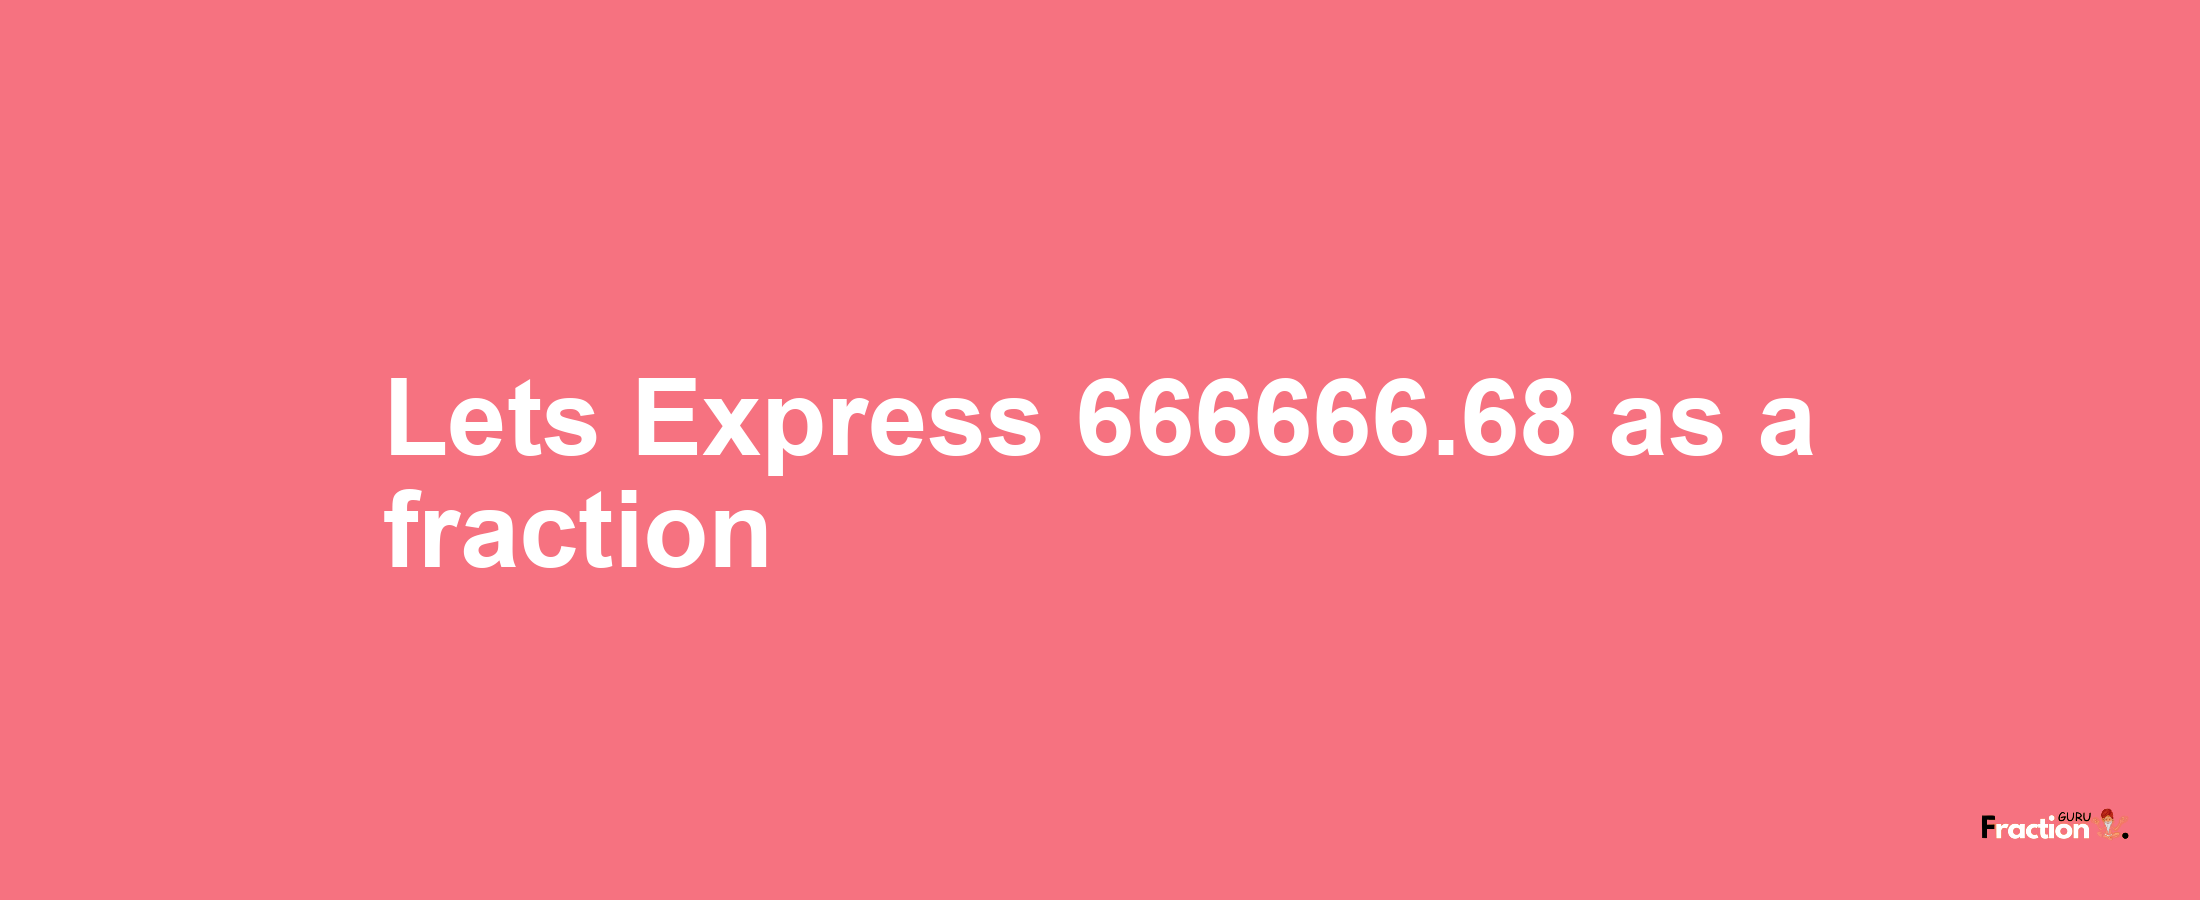 Lets Express 666666.68 as afraction